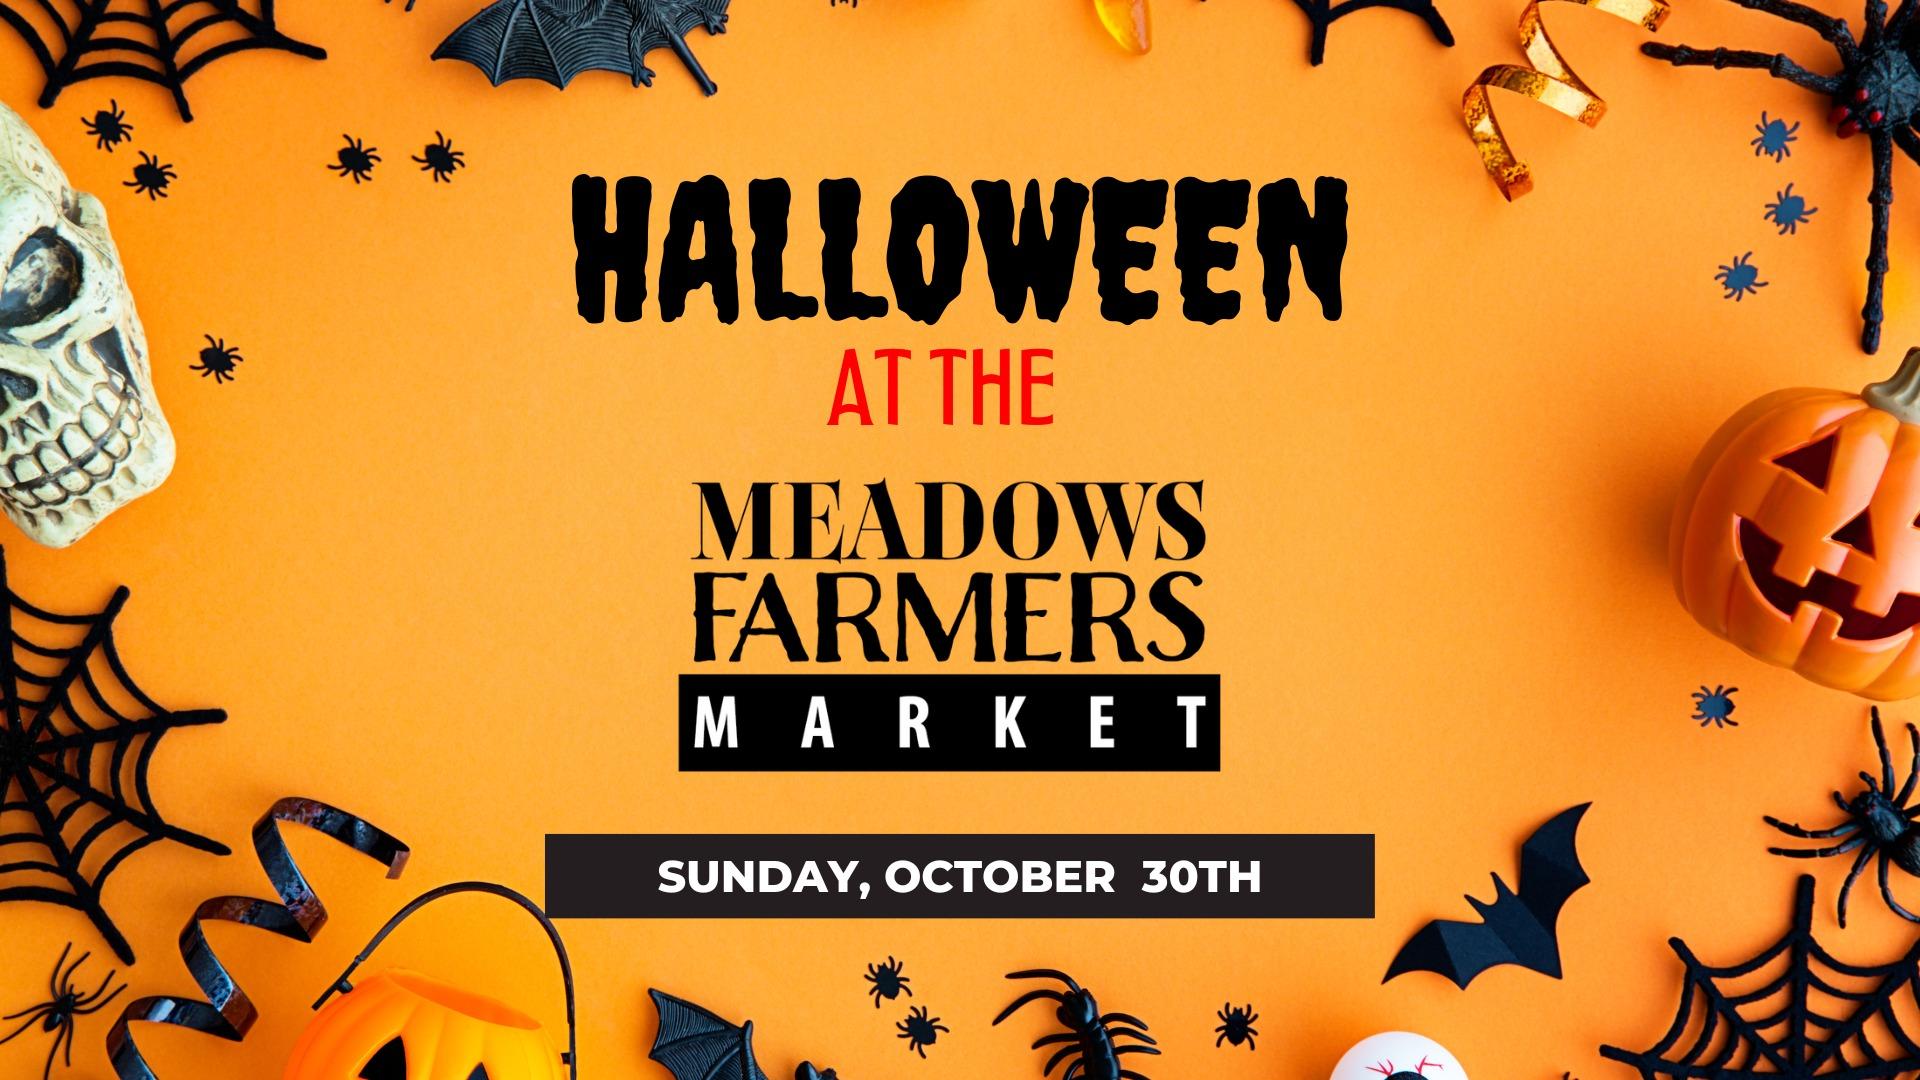 Halloween at the Meadows Farmers Market
Sun Oct 30, 10:00 AM - Sun Oct 30, 2:00 PM
in 10 days